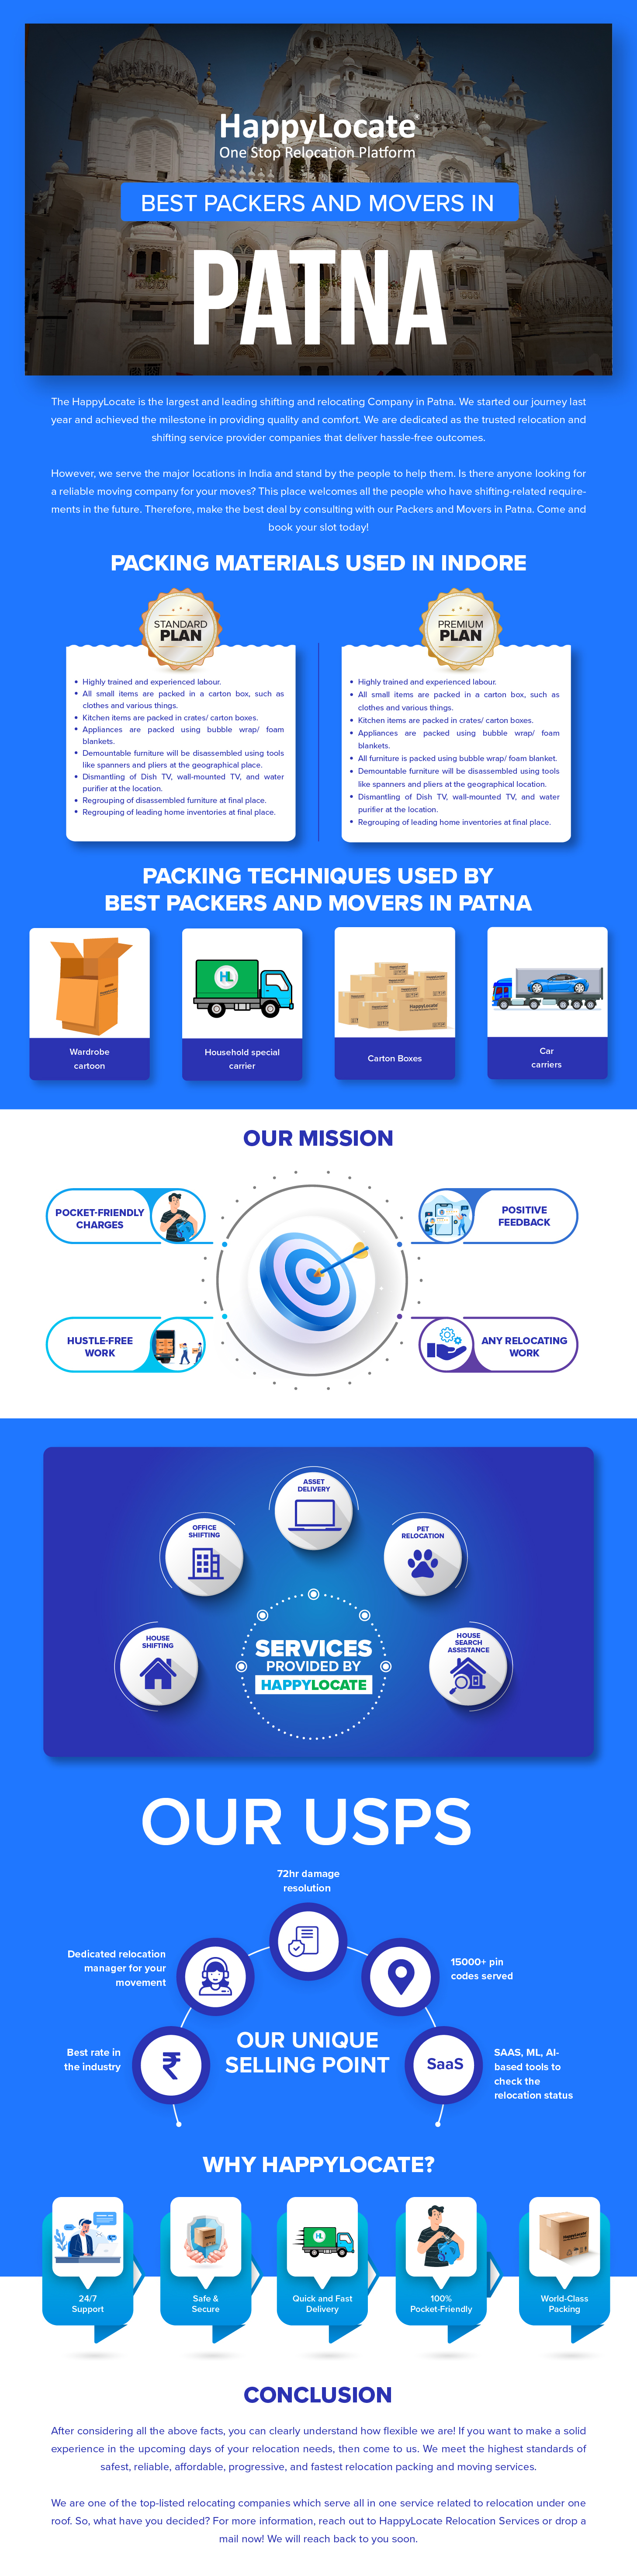 HappylLocate
One Stop Releecation Platform

BEST PACKERS AND MOVERS IN

PATNA

The Happylocate is the largest and leading shifting and relocating Company in Patna. We started our journey last
year and achieved the milestone in providing quality and comfort. We are dedicated as the trusted relocation and

shifting service provider companies that deliver hassle-free outcomes.

However, we serve the major locations in India and stand by the people to help them. Is there anyone looking for
a reliable moving company for your moves? This place welcomes all the people who have shifting-related require-
ments in the future. Therefore, make the best deal by consulting with our Packers and Movers in Patna. Come and

book your slot today!

PACKING MATERIALS USED IN INDORE

STANDARD PREMIUM
| PLAN

\ /

Highly trained and expenenced labour

All small tems are packed in a carton box, such as
clothes and various things

Kitchen ftems are packed in crates/ carton boxes
Appliances are packed using bubble wrap/ foam
blankets

Highly trained and expenenced labour
All small items are packed in a carton box, such as
clothes and various things

Kitchen items are packed in crates/ carton boxes
Appliances are packed using bubble wrap/ foam
blankets

 
    
   

Demountable furniture will be disassembled using tools
like spanners and pliers at the geographical place
Dwsmantling of Dish TV, wall-mounted TV. and water
purifier at the location

All furniture 1s packed using bubble wrap/ foam blanket
Demountable furniture will be disassembled using tools
like spanners and pliers at the geographical location
Regrouping of disassembled furniture at final place. Dismantling of Dish TV, wall-mounted TV, and water
Regrouping of leading home inventories at final place Purifierat the location;

Regrouping of leading home inventories at final place

 

PACKING TECHNIQUES USED BY
BEST PACKERS AND MOVERS IN PATNA

  

LIT ITS [ETECL Et] Car
) Carton Boxes )
cartoon carrier carners

OUR MISSION

POCKET-FRIENDLY POSITIVE
CHARGES FEEDBACK

HUSTLE-FREE ANY RELOCATING
WORK © WORK

 

EVE

® PROVIDEDBY @

Bl HAPPYLOCATE [K

 

OUR USP

72hr damage
resolution

Dedicated relocation
manager for your
[IT ET

15000+ pin
codes served

 

OUR UNIQUE

|: EEE E TC] SAAS, ML, Al-

the industry SELLING POINT based tools to

\ /
WHY HAPPYLOCATE?

)

Quick and Fast pel World-Class
Delivery Pocket-Friendly Packing

CONCLUSION

After considering all the above facts, you can clearly understand how flexible we are! If you want to make a solid

experience in the upcoming days of your relocation needs, then come to us. We meet the highest standards of

safest, reliable, affordable, progressive, and fastest relocation packing and moving services.

We are one of the top-listed relocating companies which serve all in one service related to relocation under one
roof. So, what have you decided? For more information, reach out to Happylocate Relocation Services or drop a

mail now! We will reach back to you soon.